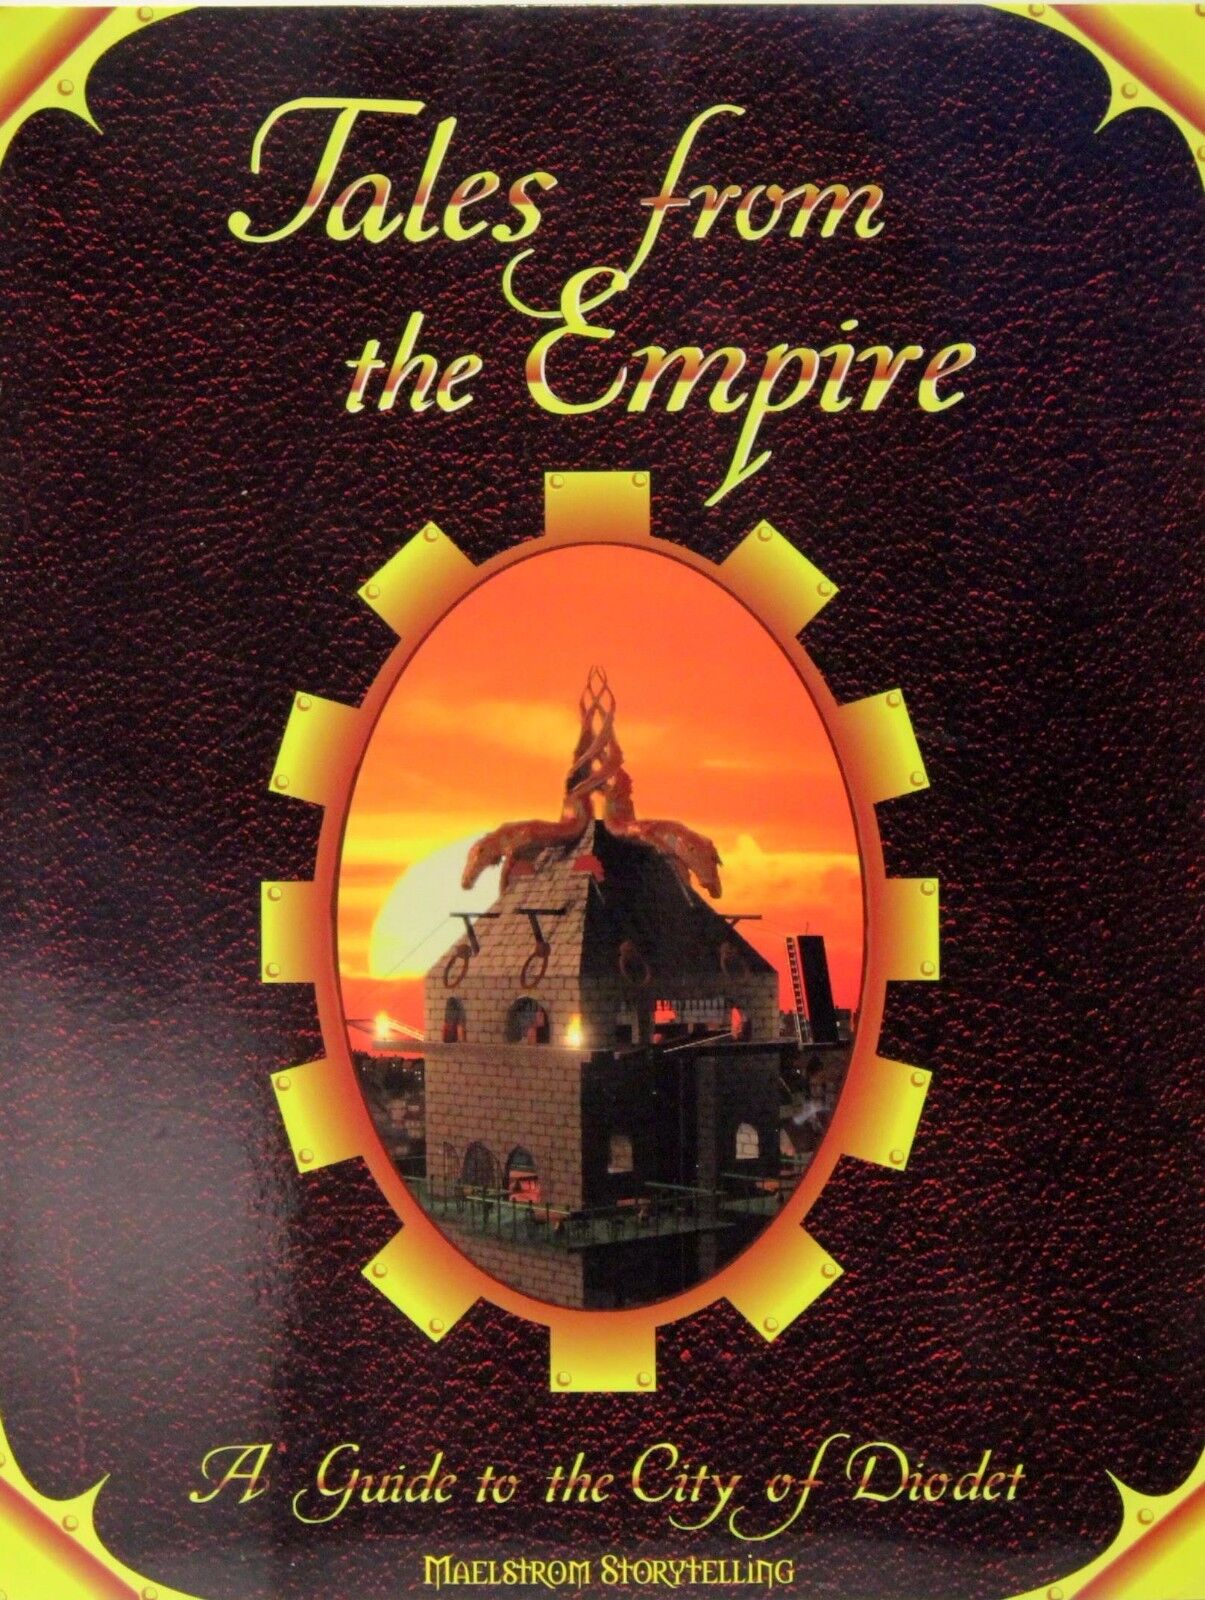 Tales from the Empire (1998)